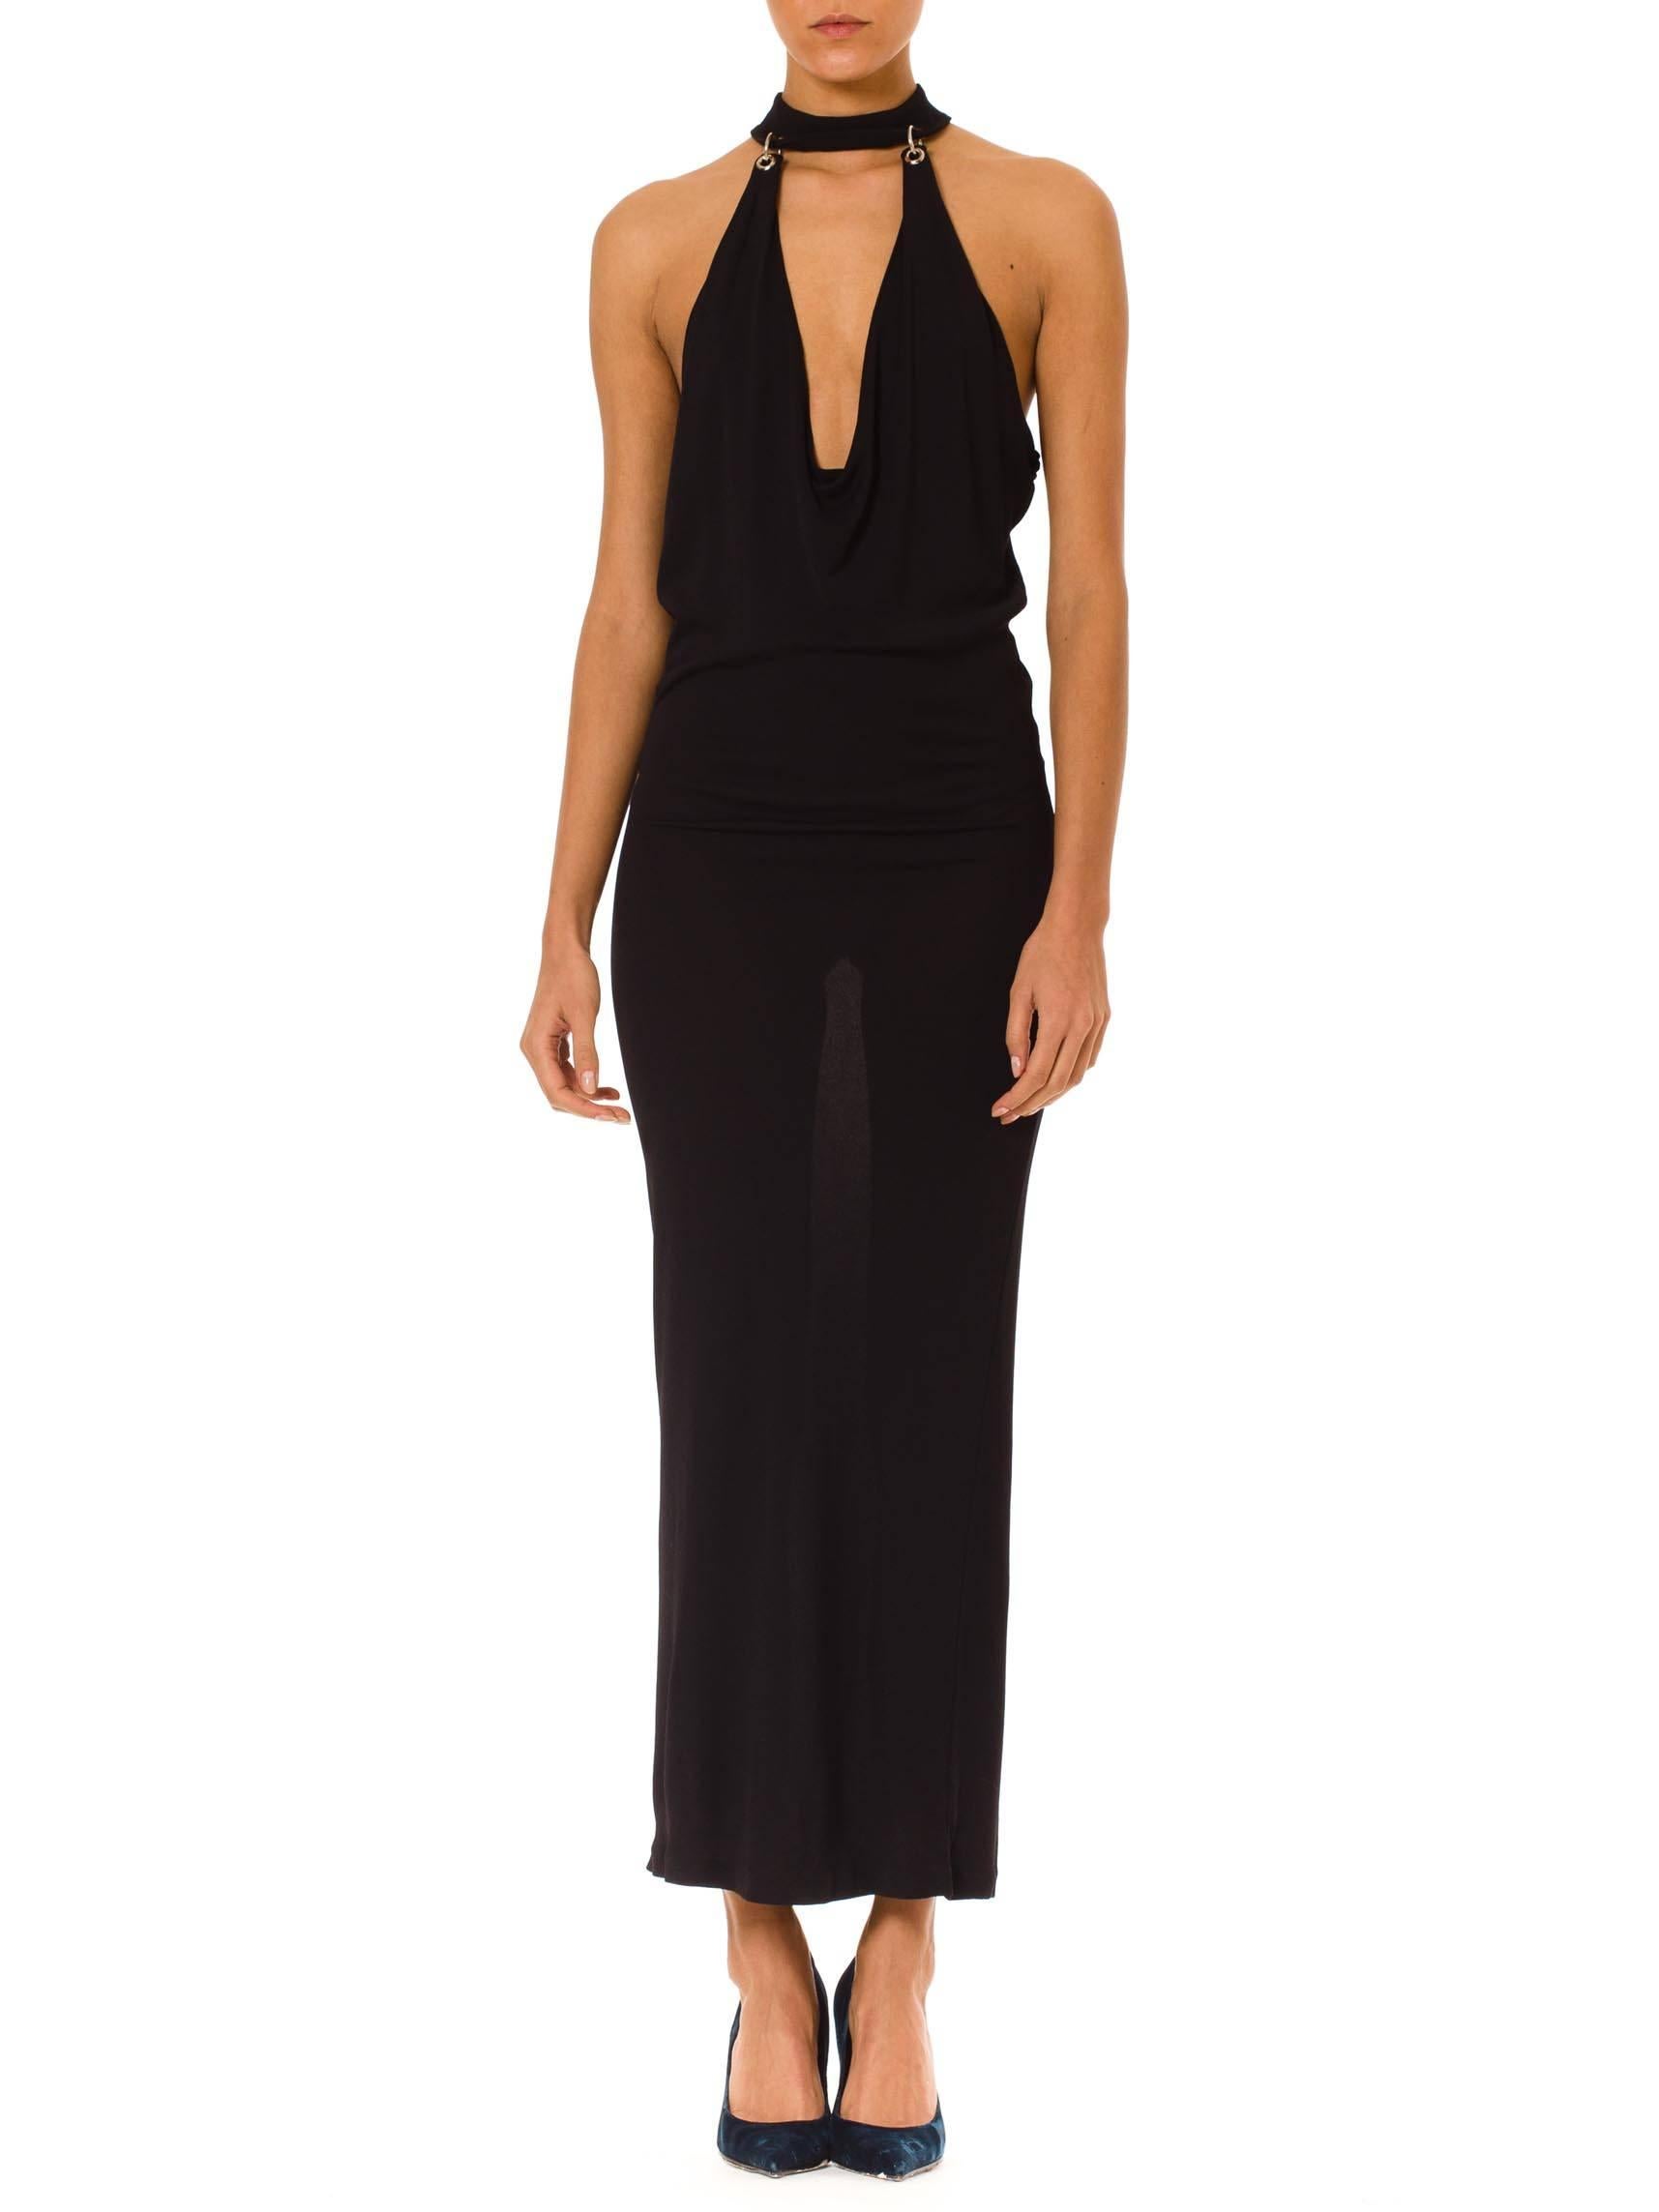 This is a stunningly sexy gown by French designer Paco Rabanne. The gown is deceptively simple, with a body-conscious silhouette, ankle-length hem, and matte black fabric. The vamp-factor comes from the incredible neckline and body revealing cut.